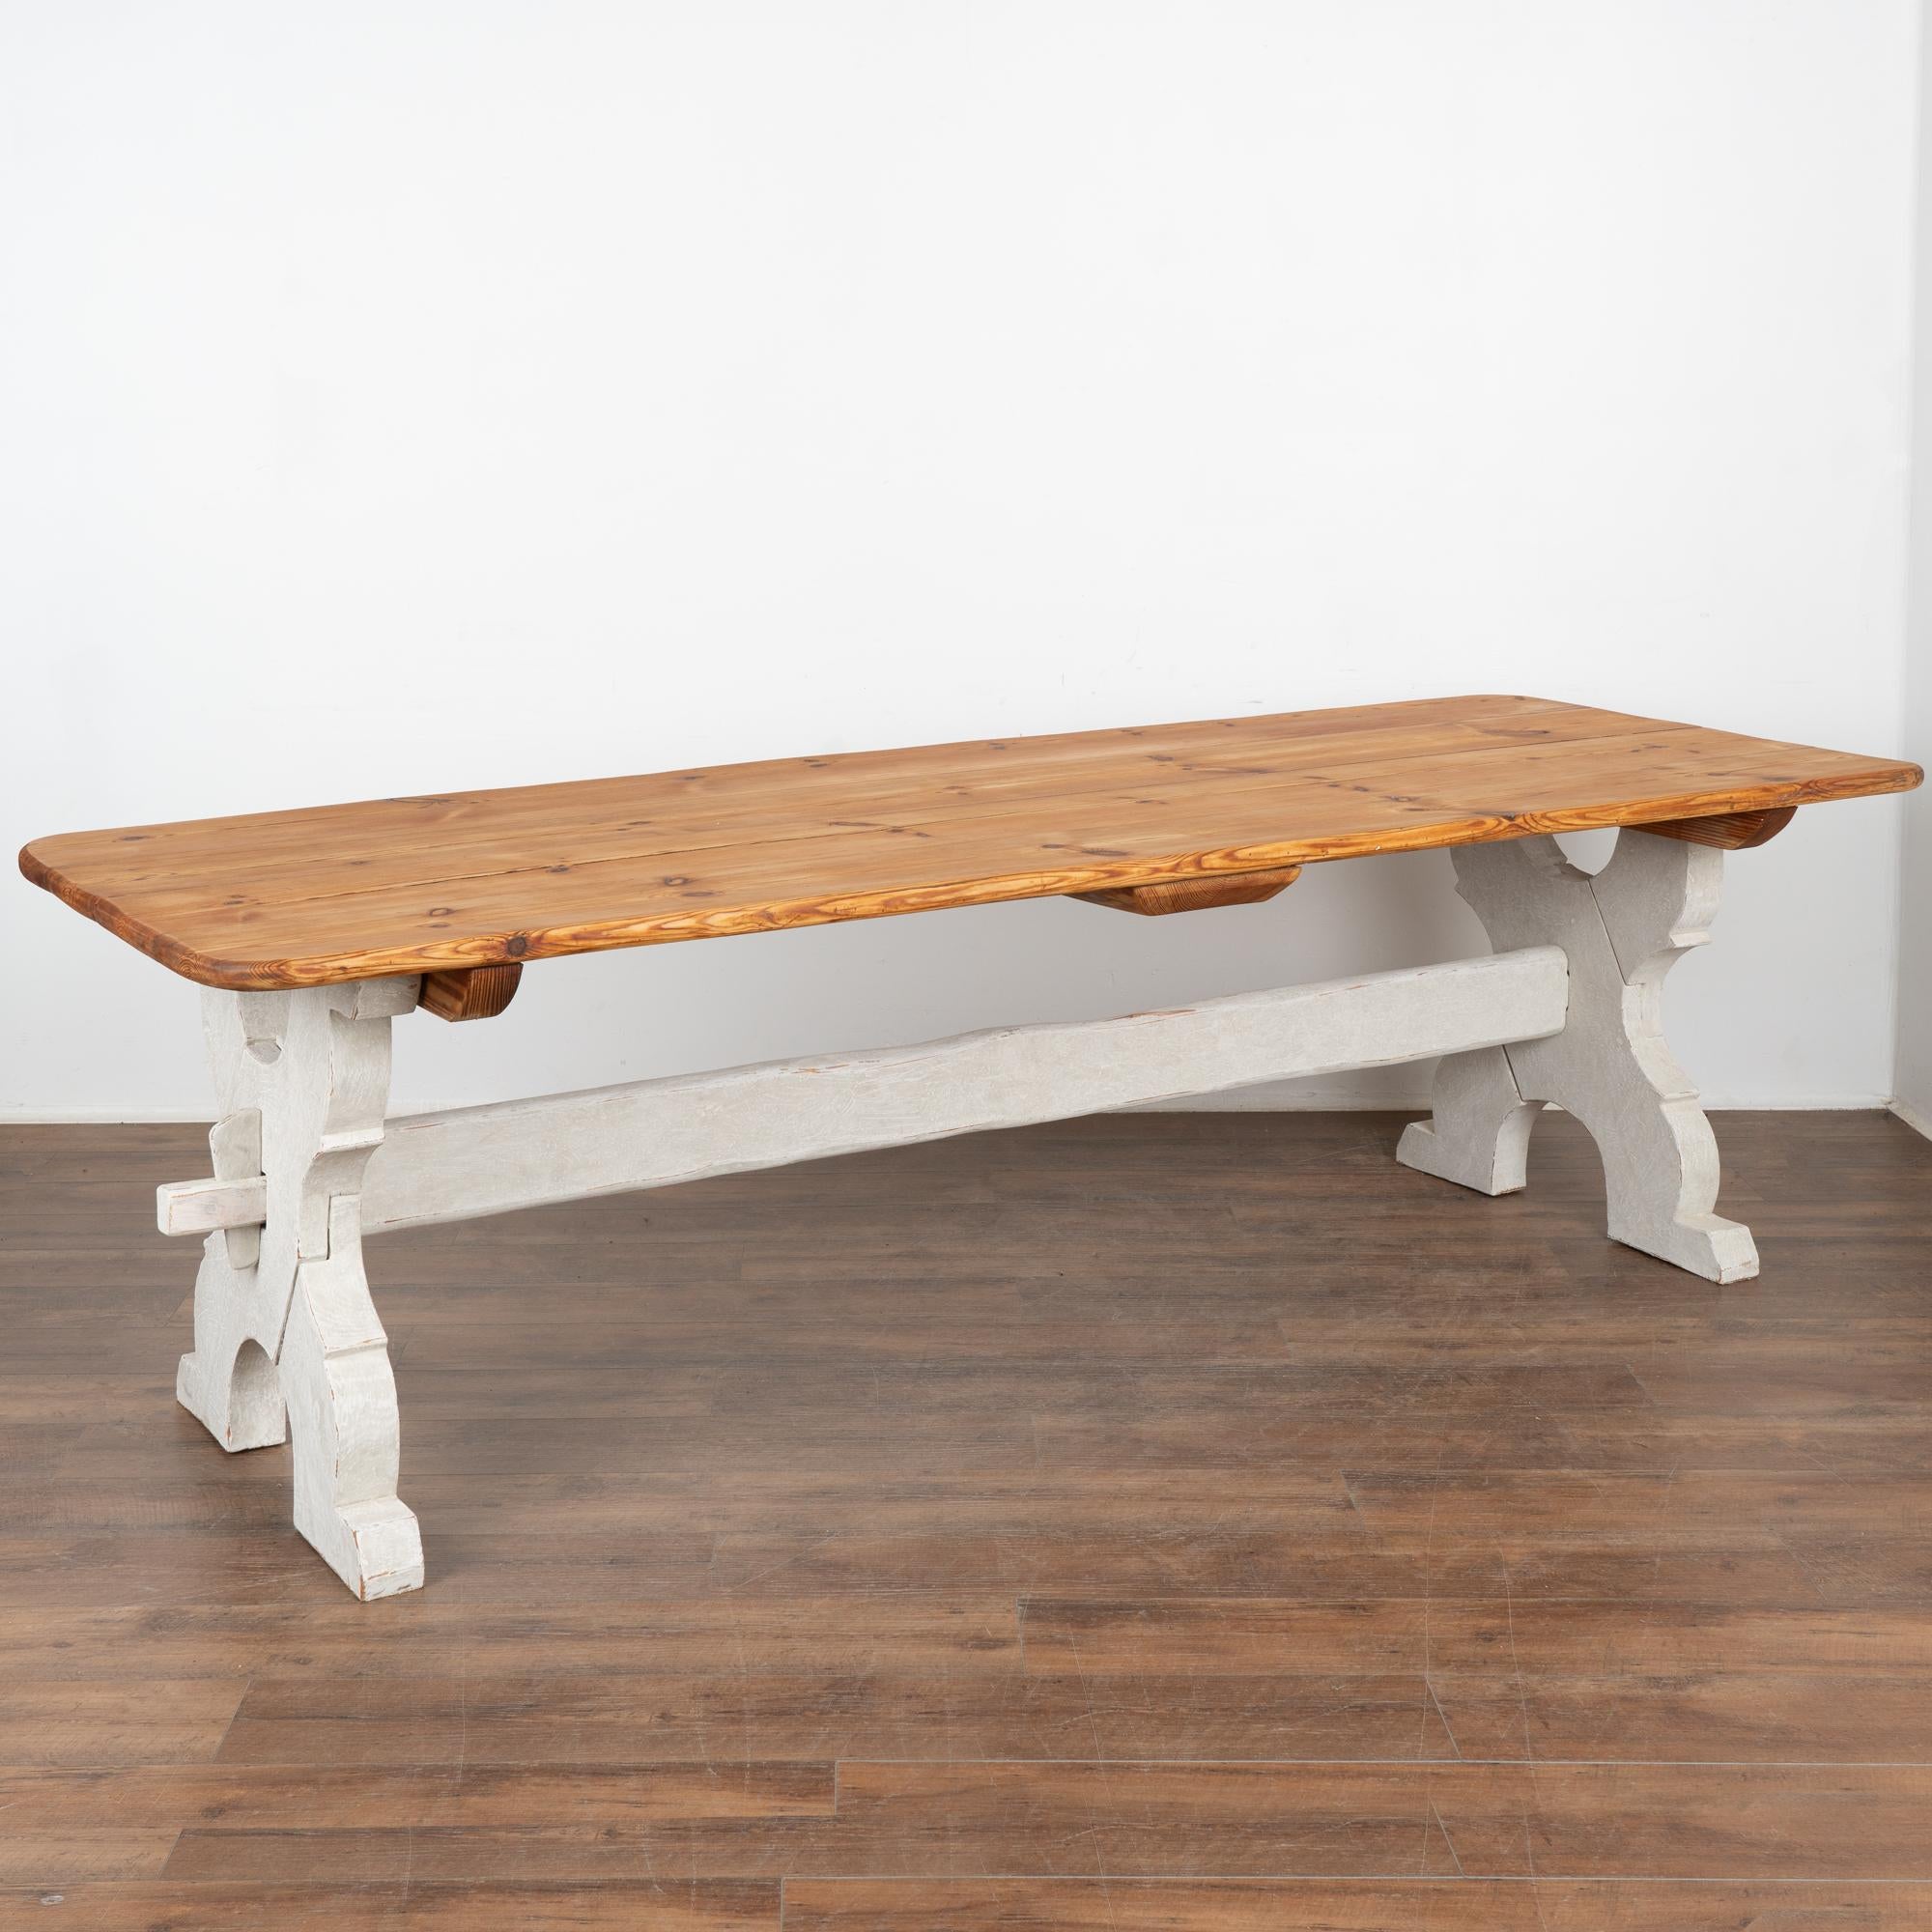 This old pine farm table is loaded with aged patina and warmth that come from generations of use. 
The strong 